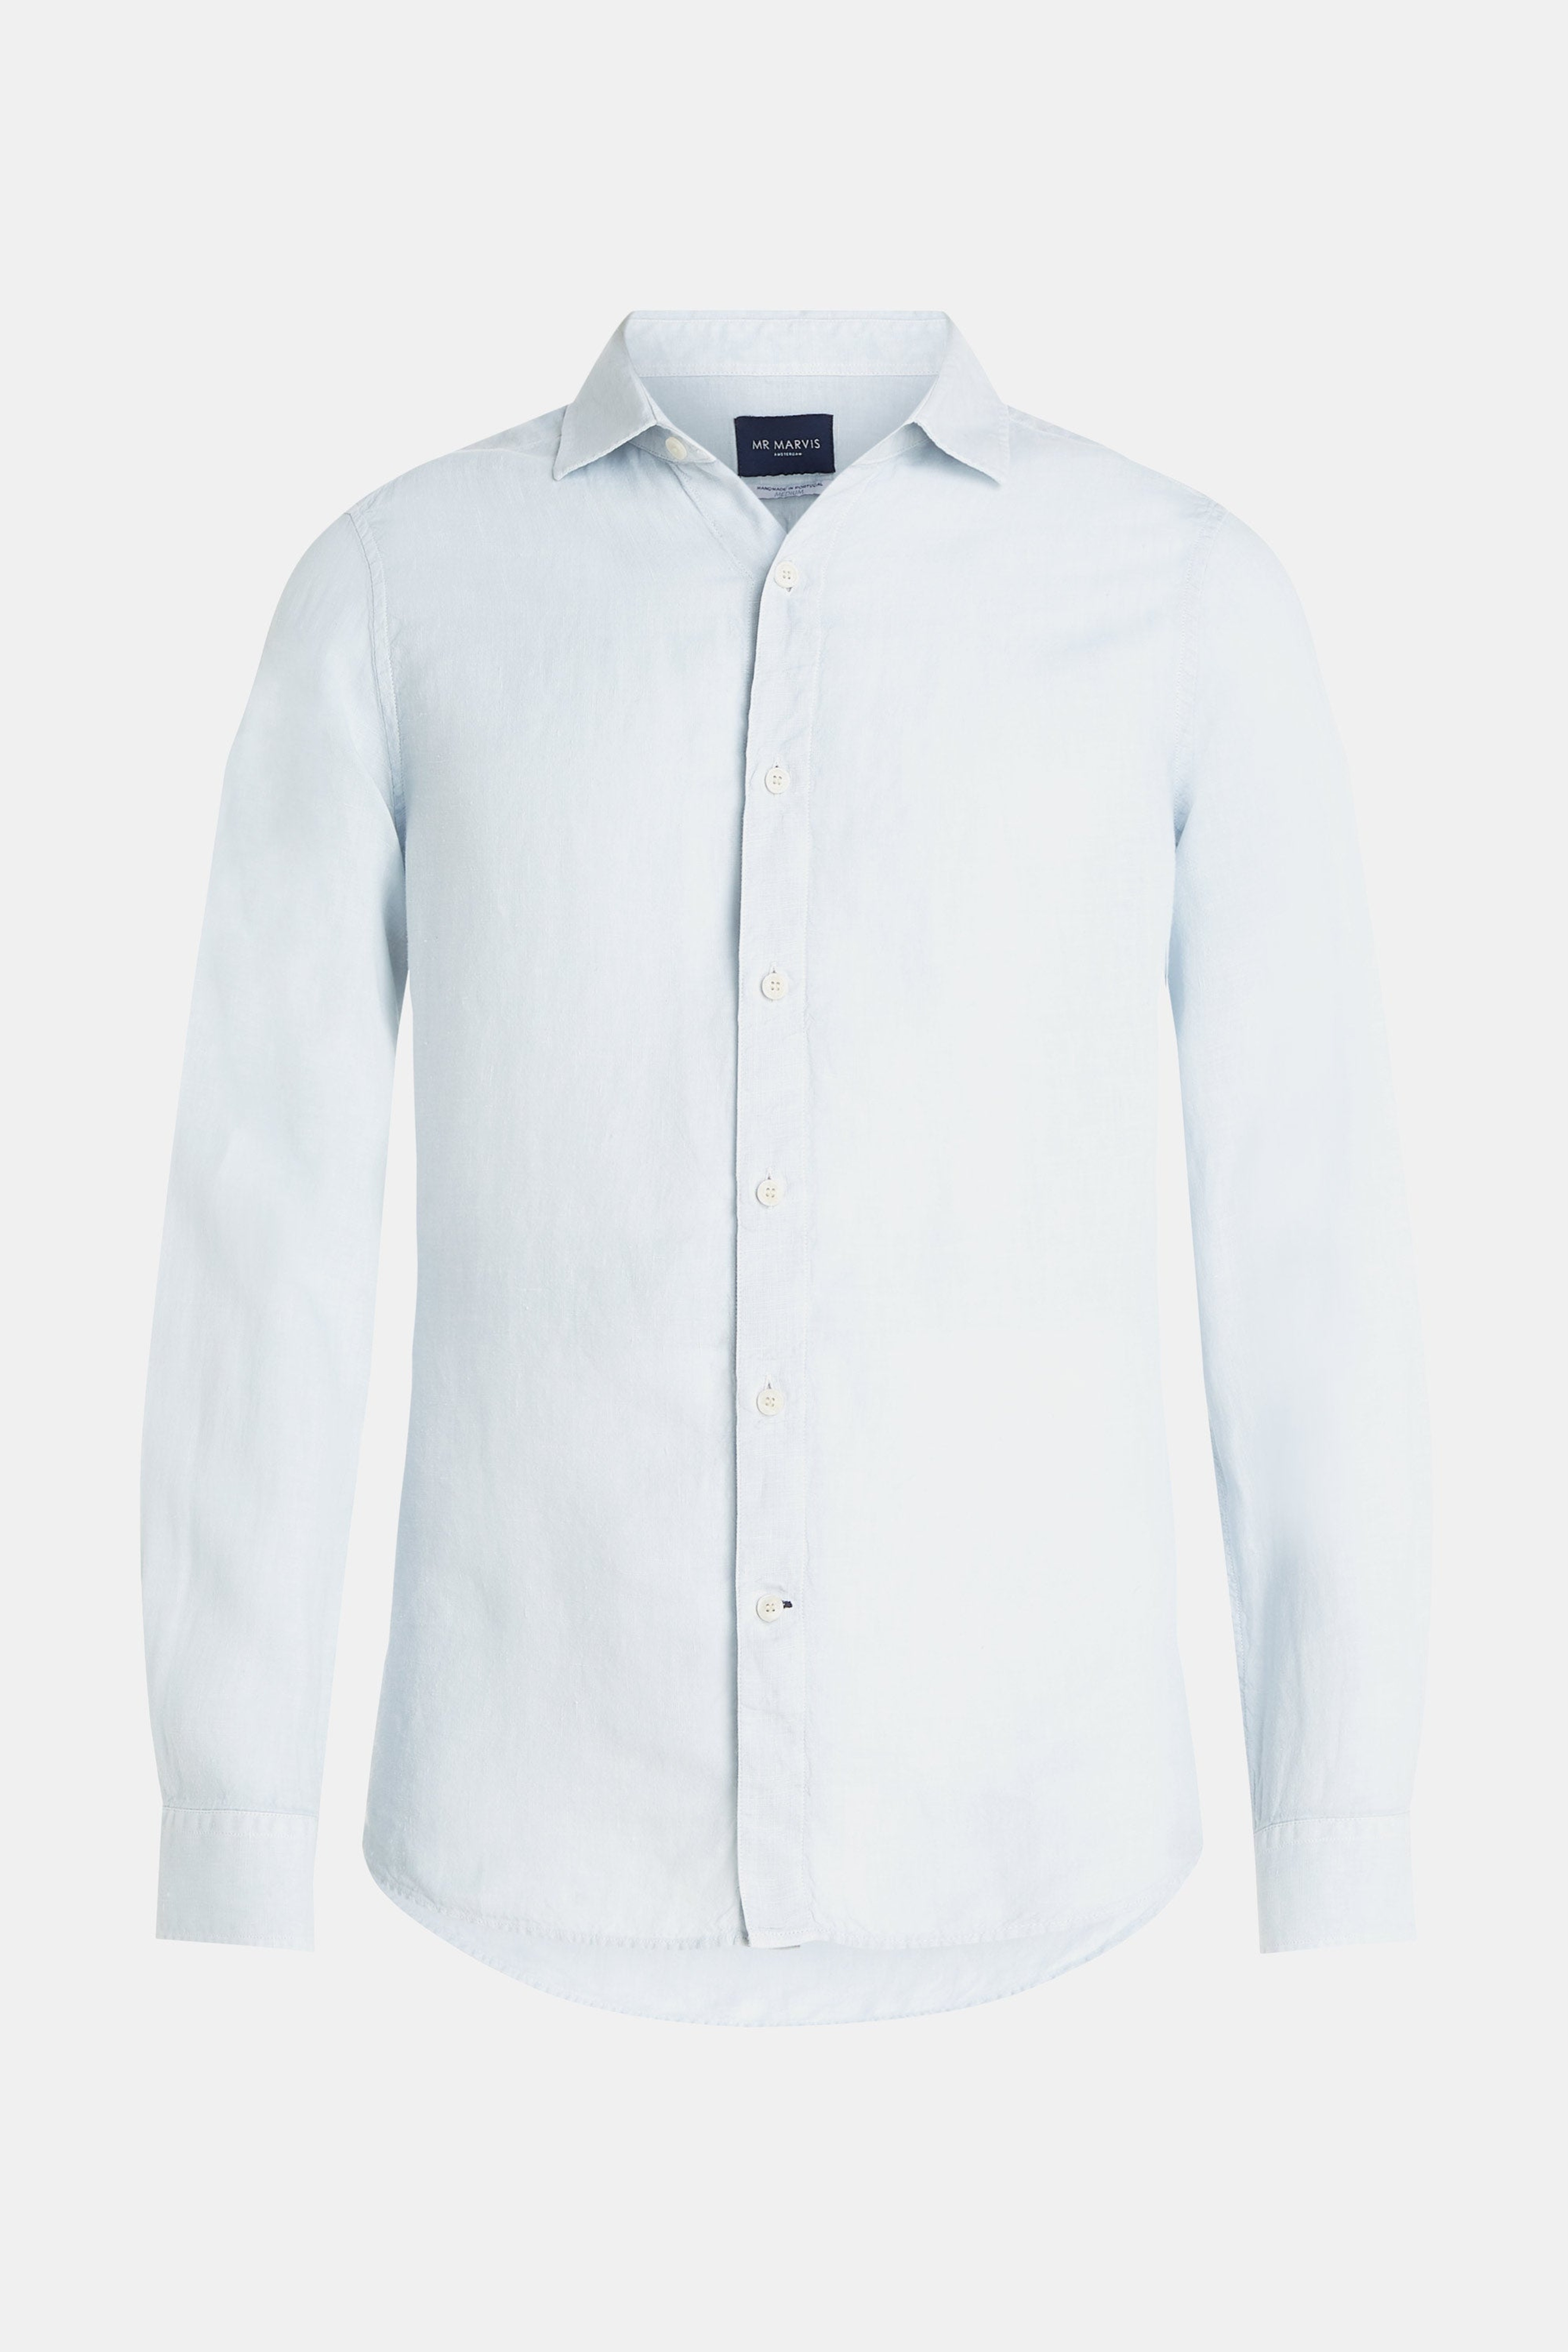 Avenues - The Linen Shirts